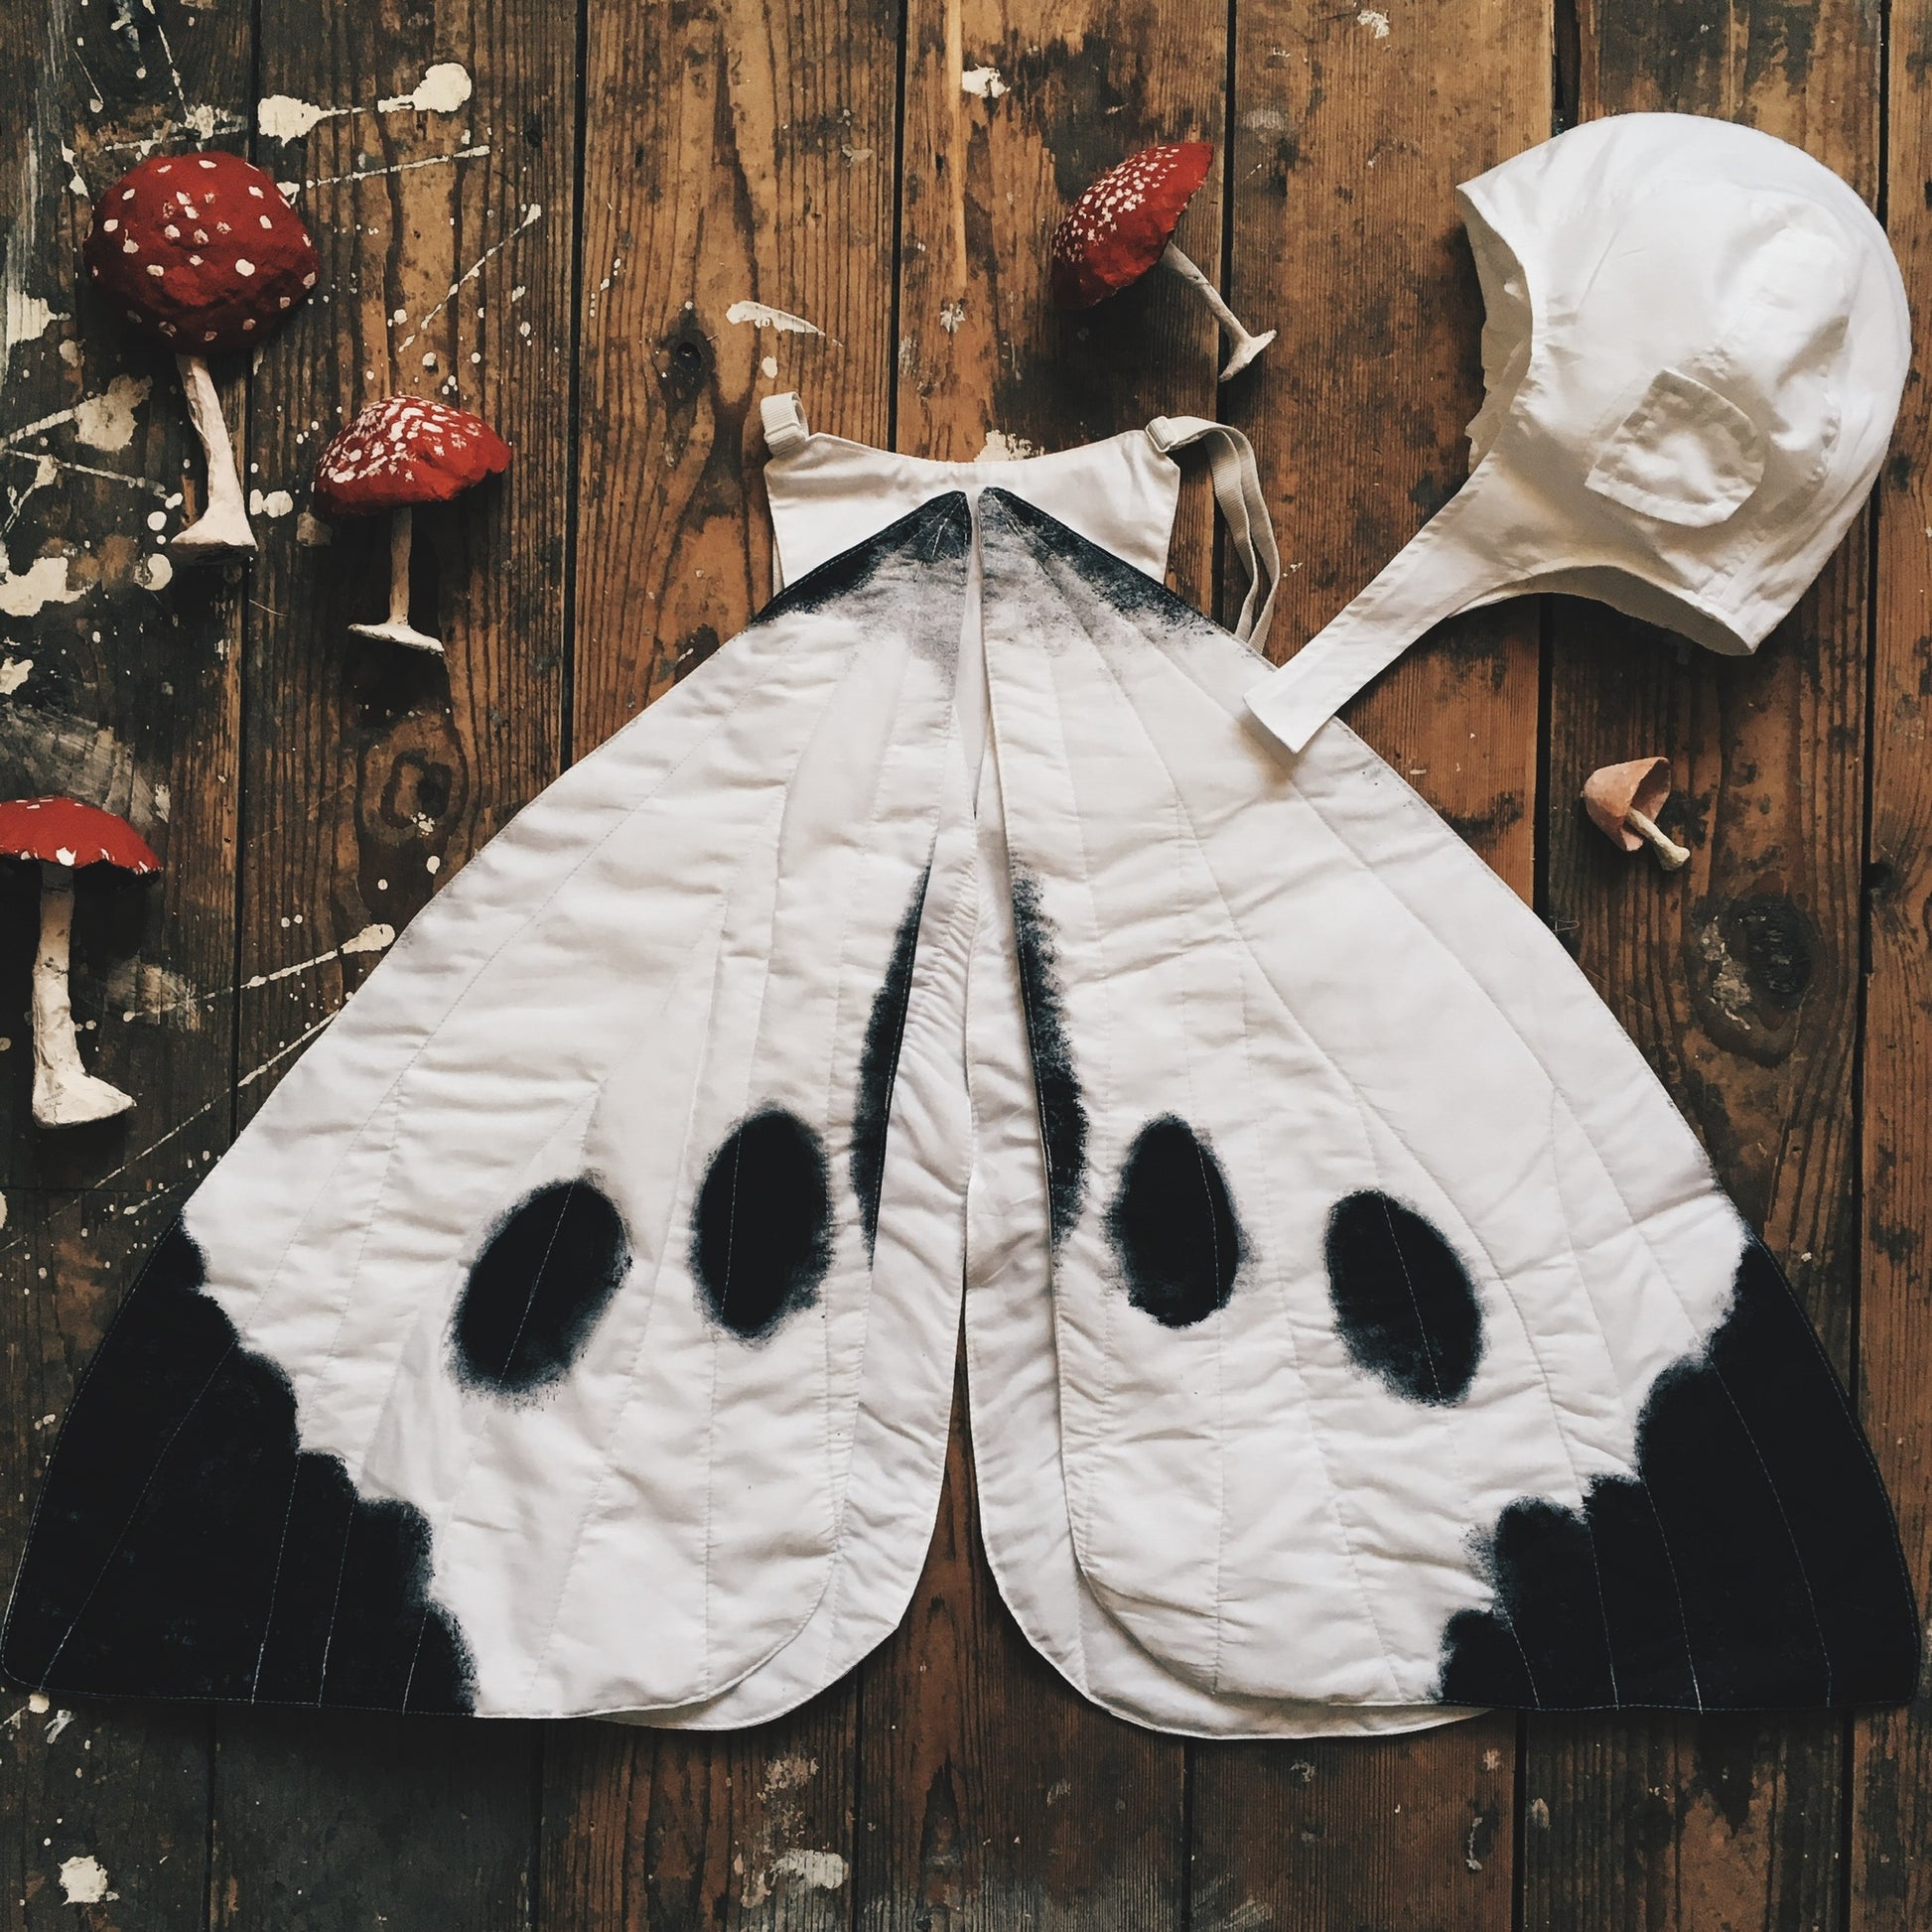 cabbage child's costume.  White butterfly wings and white flying hat placed on wooden floorboards